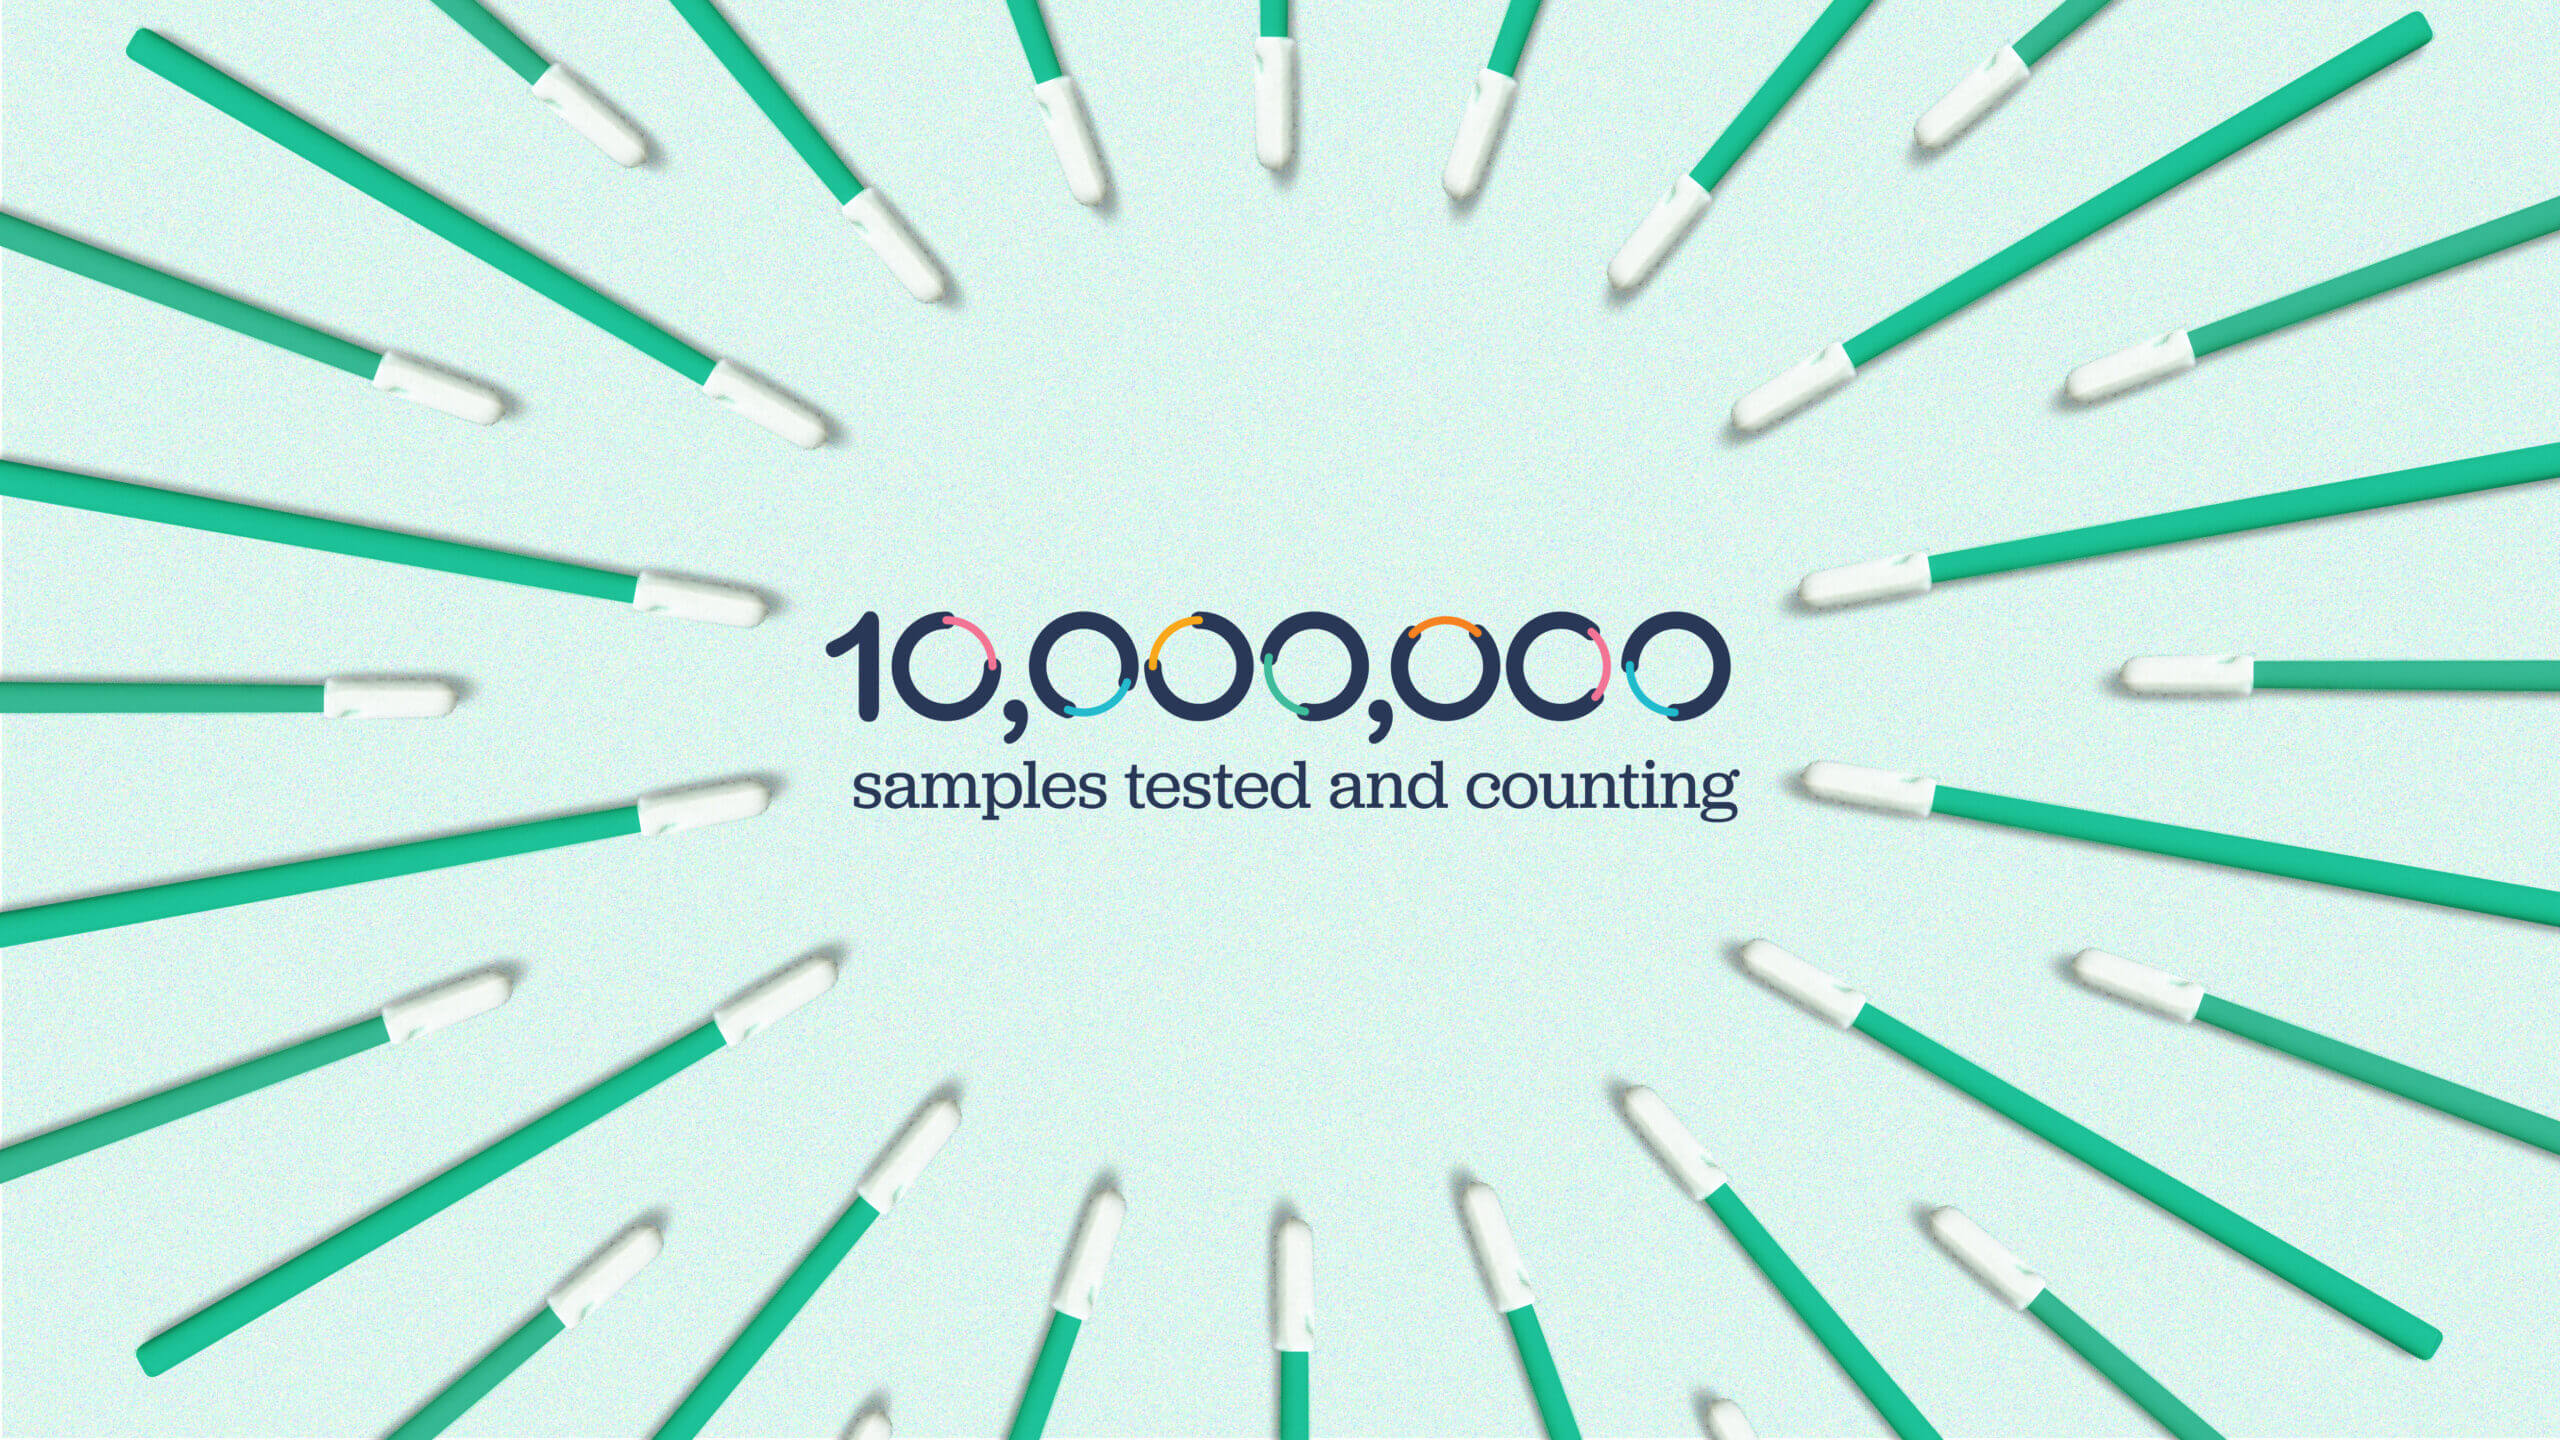 10 million samples tested and counting